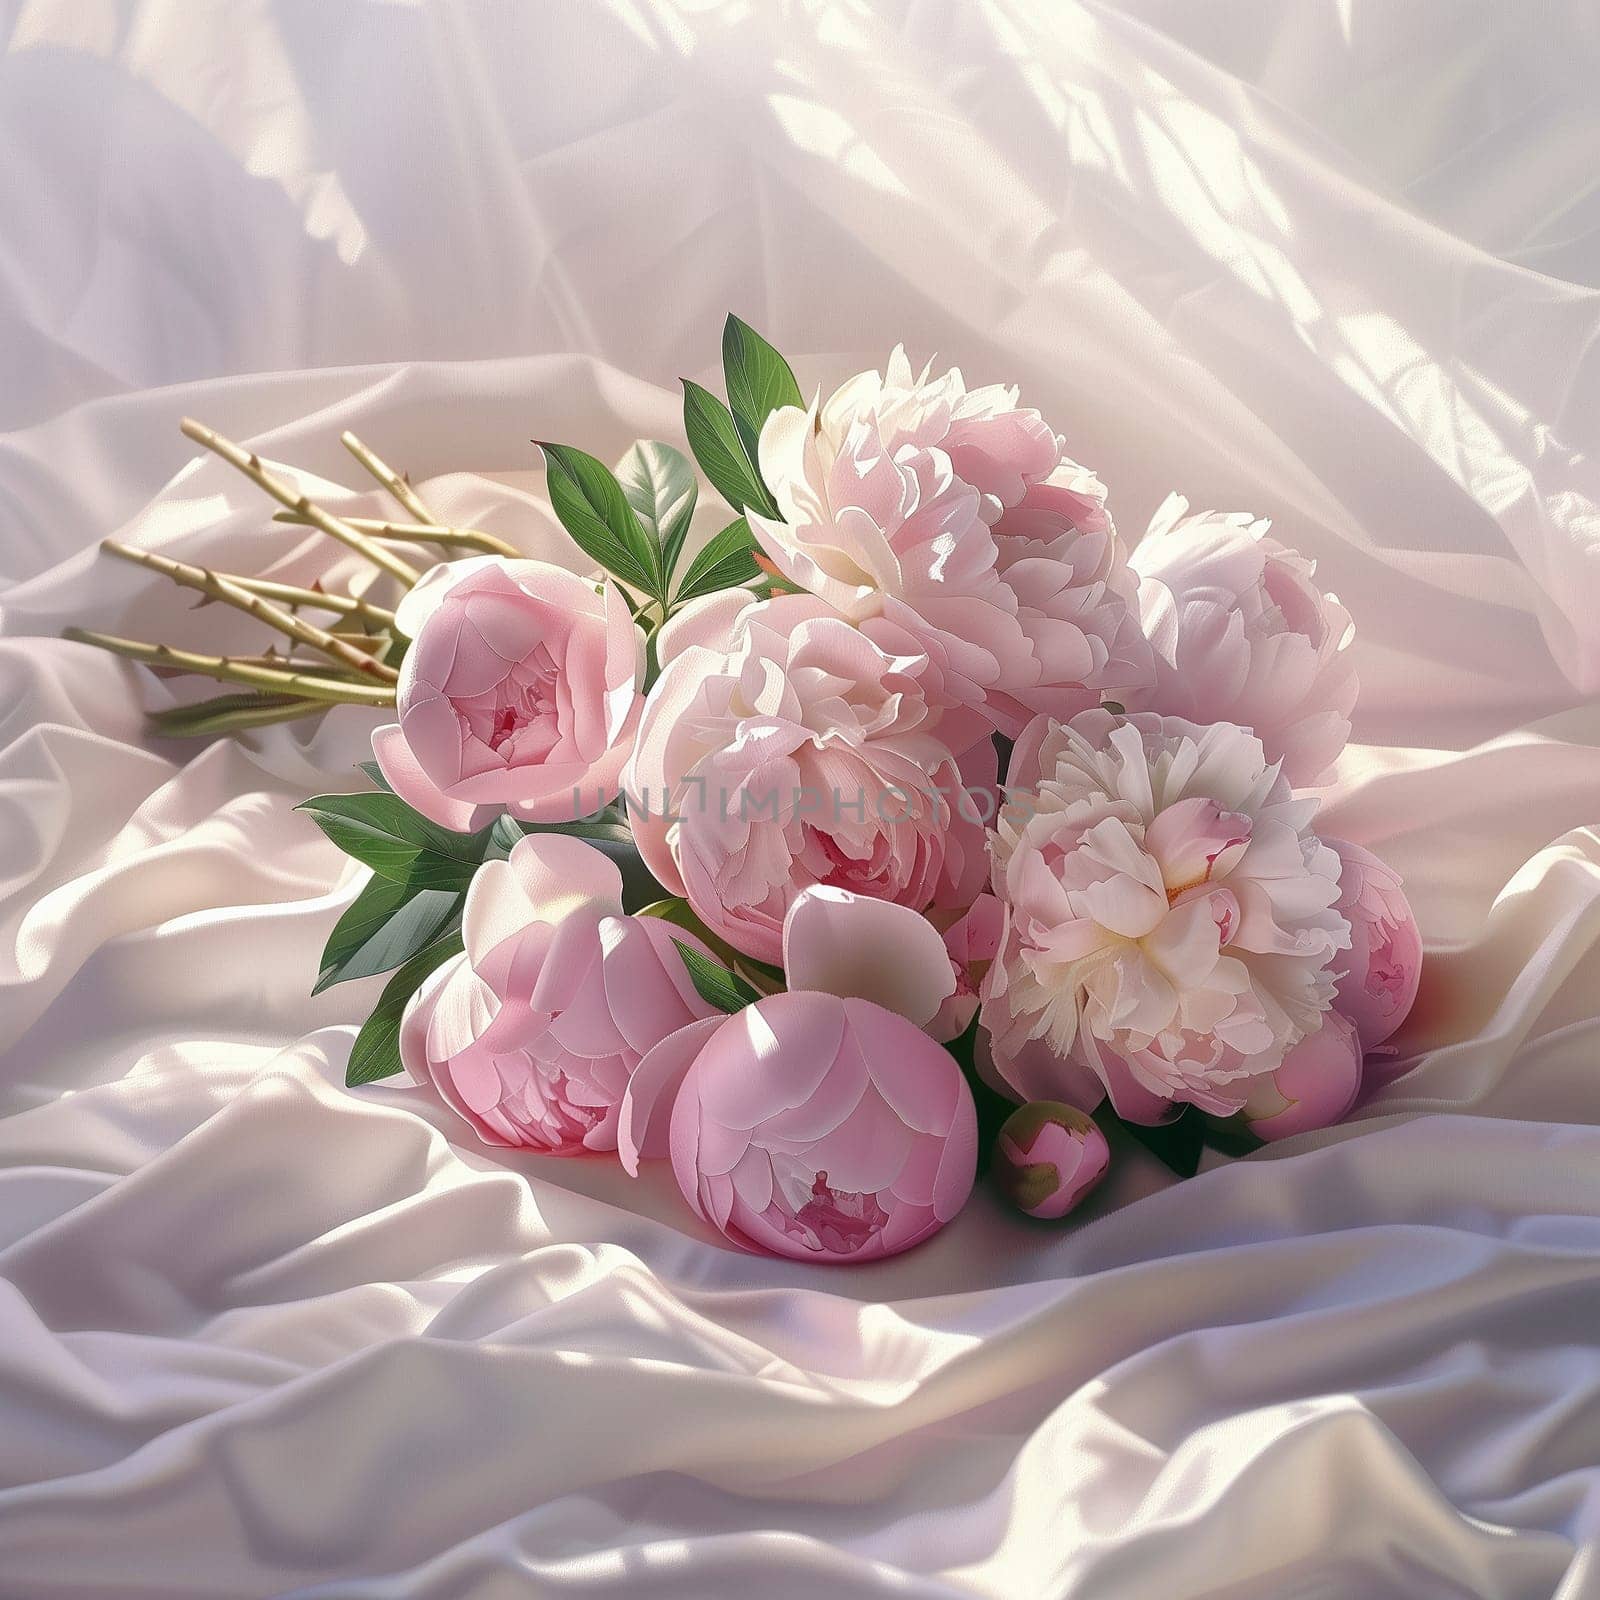 A bouquet of white peonies lying on the bed in the morning. High quality illustration